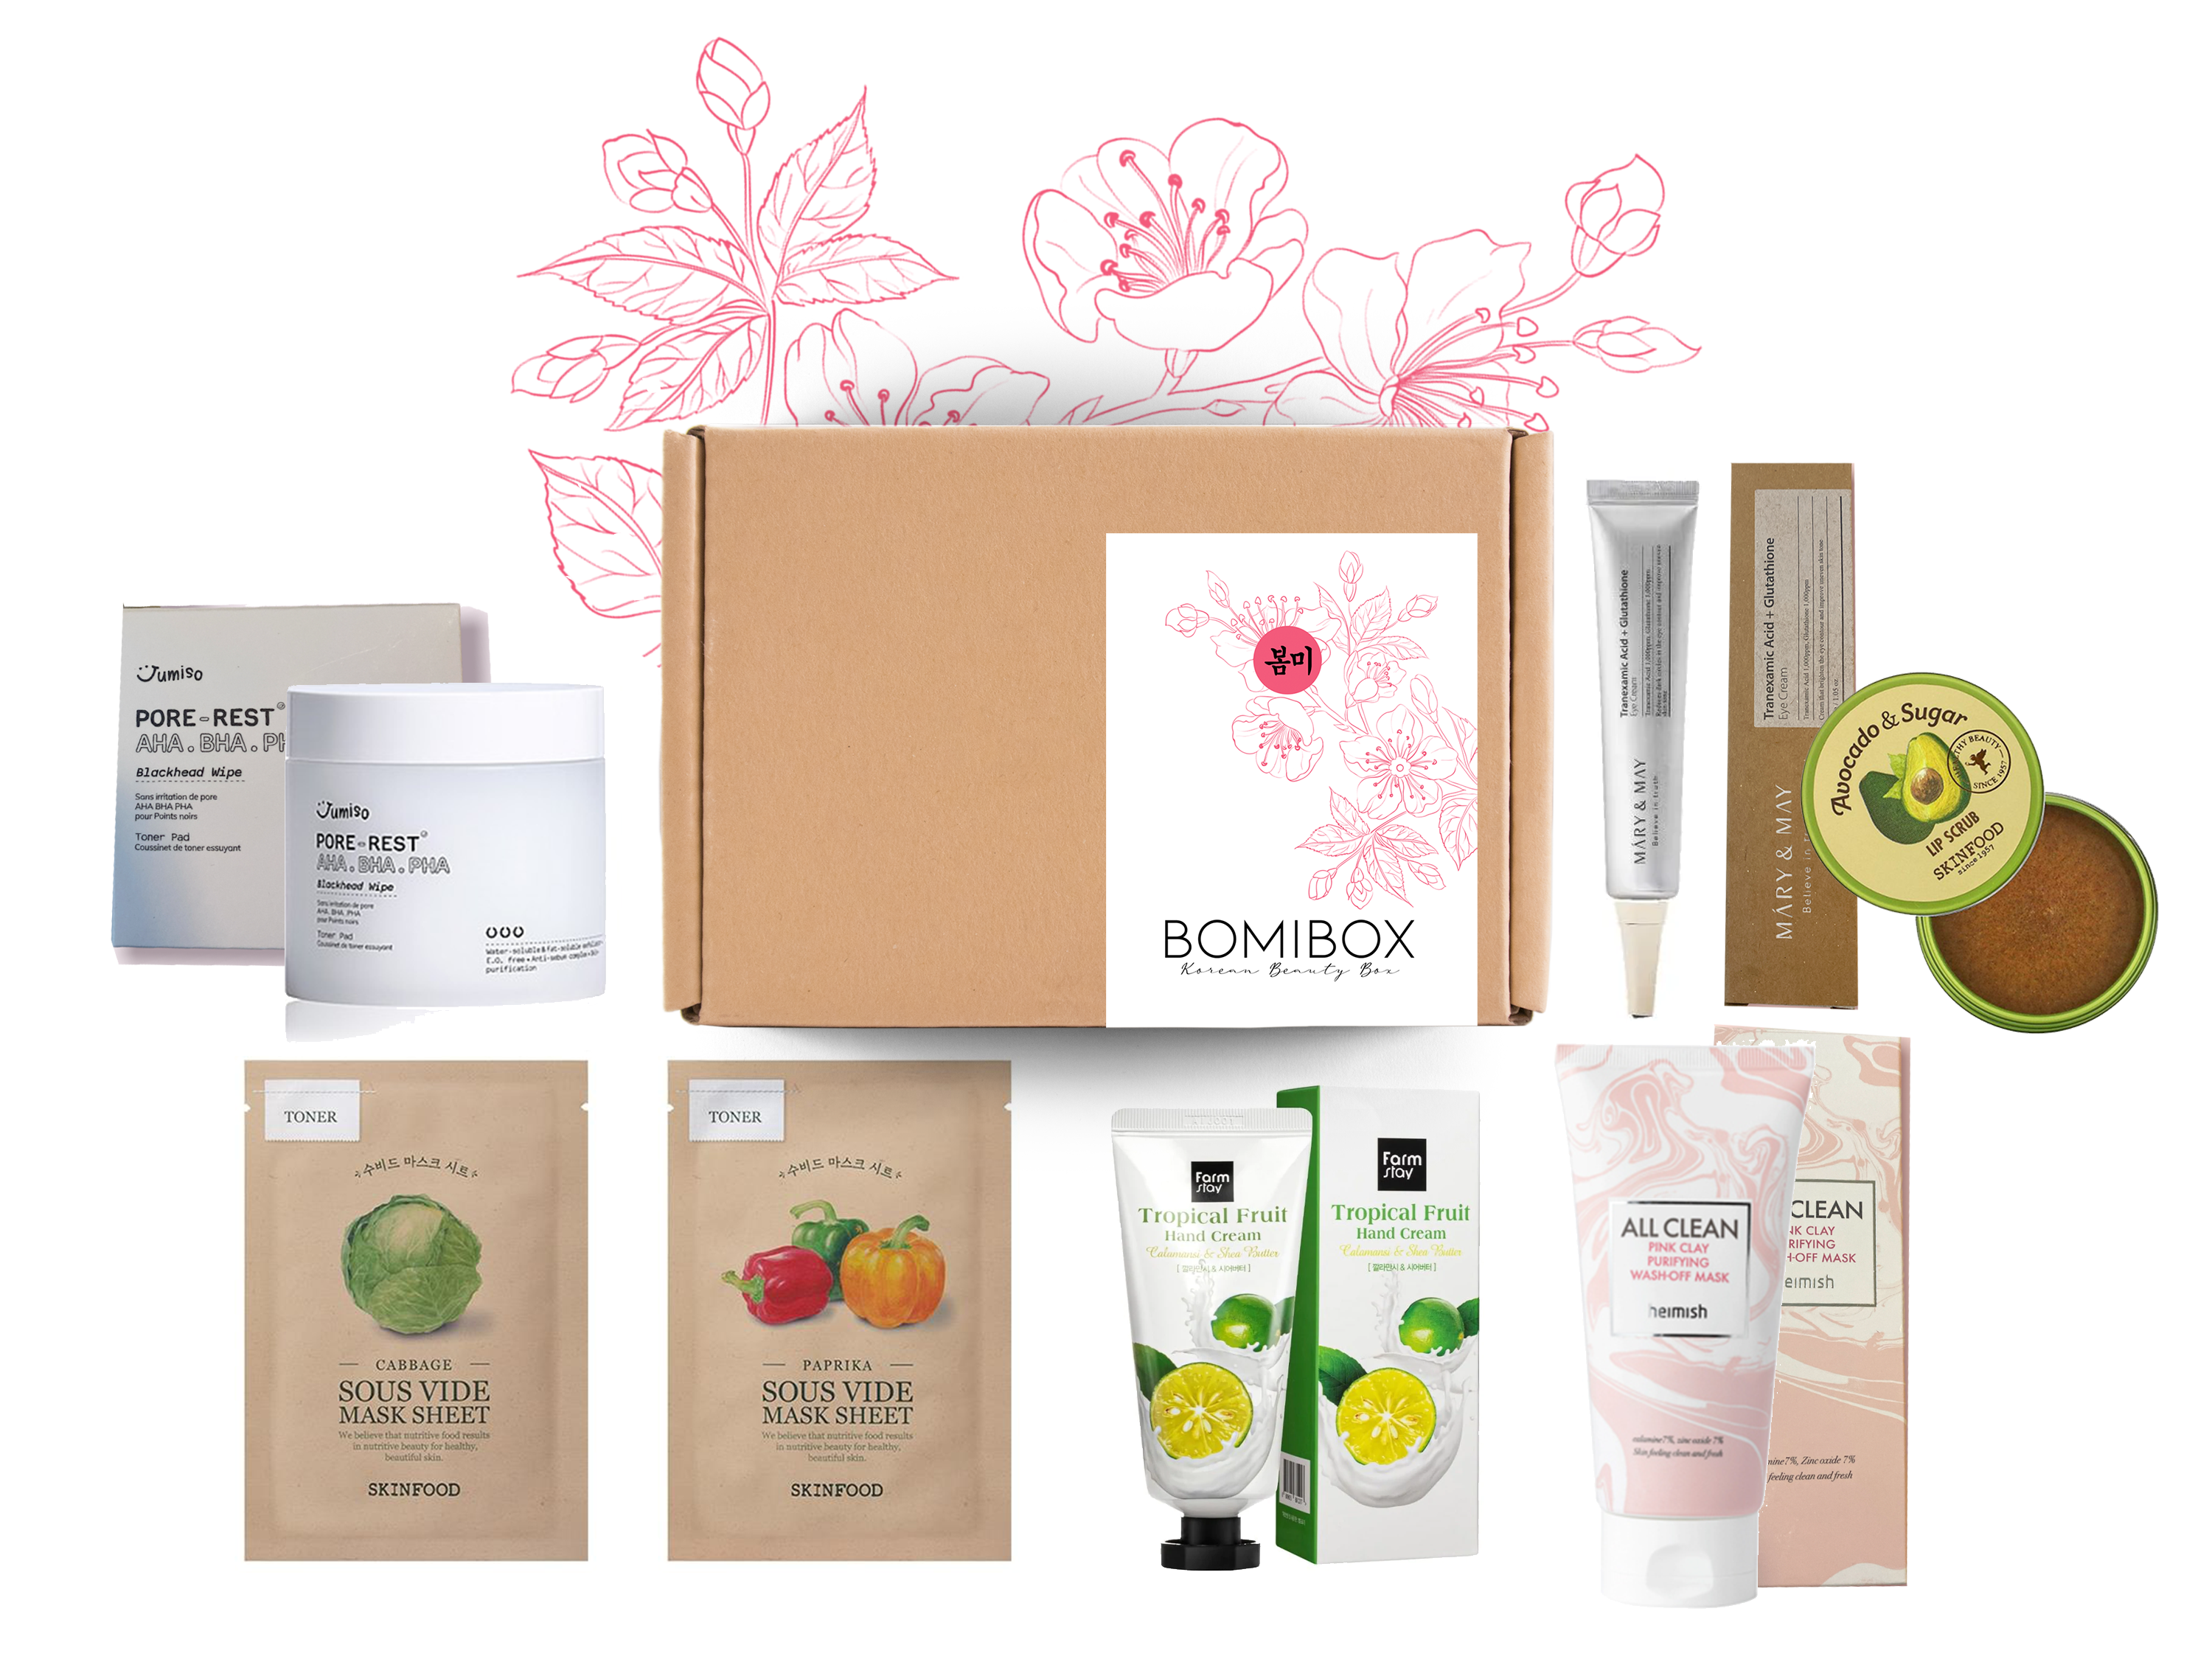 Past Boxes-Bomibox Spring Is In The Air - Korean Beauty Box Monthly Korean Skincare Subscription